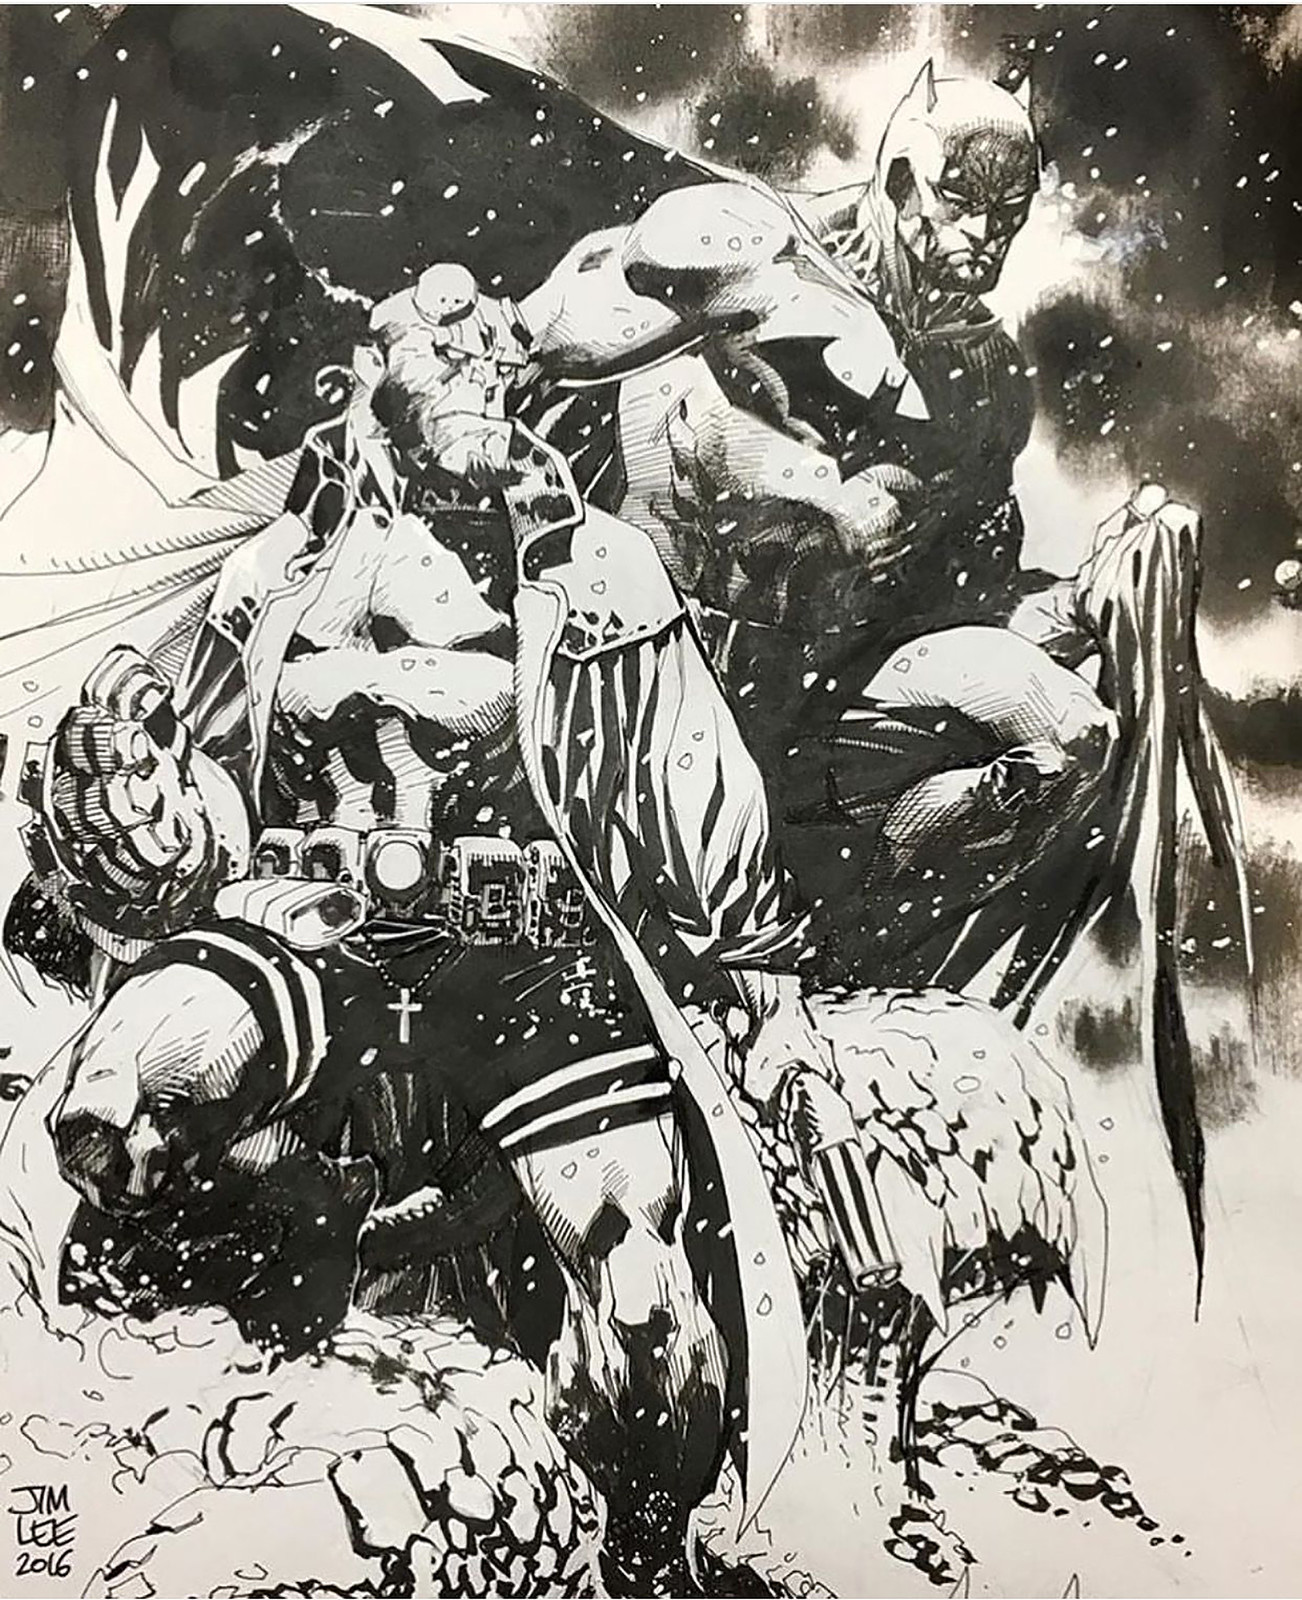 Line art by Jim Lee, the maestro!